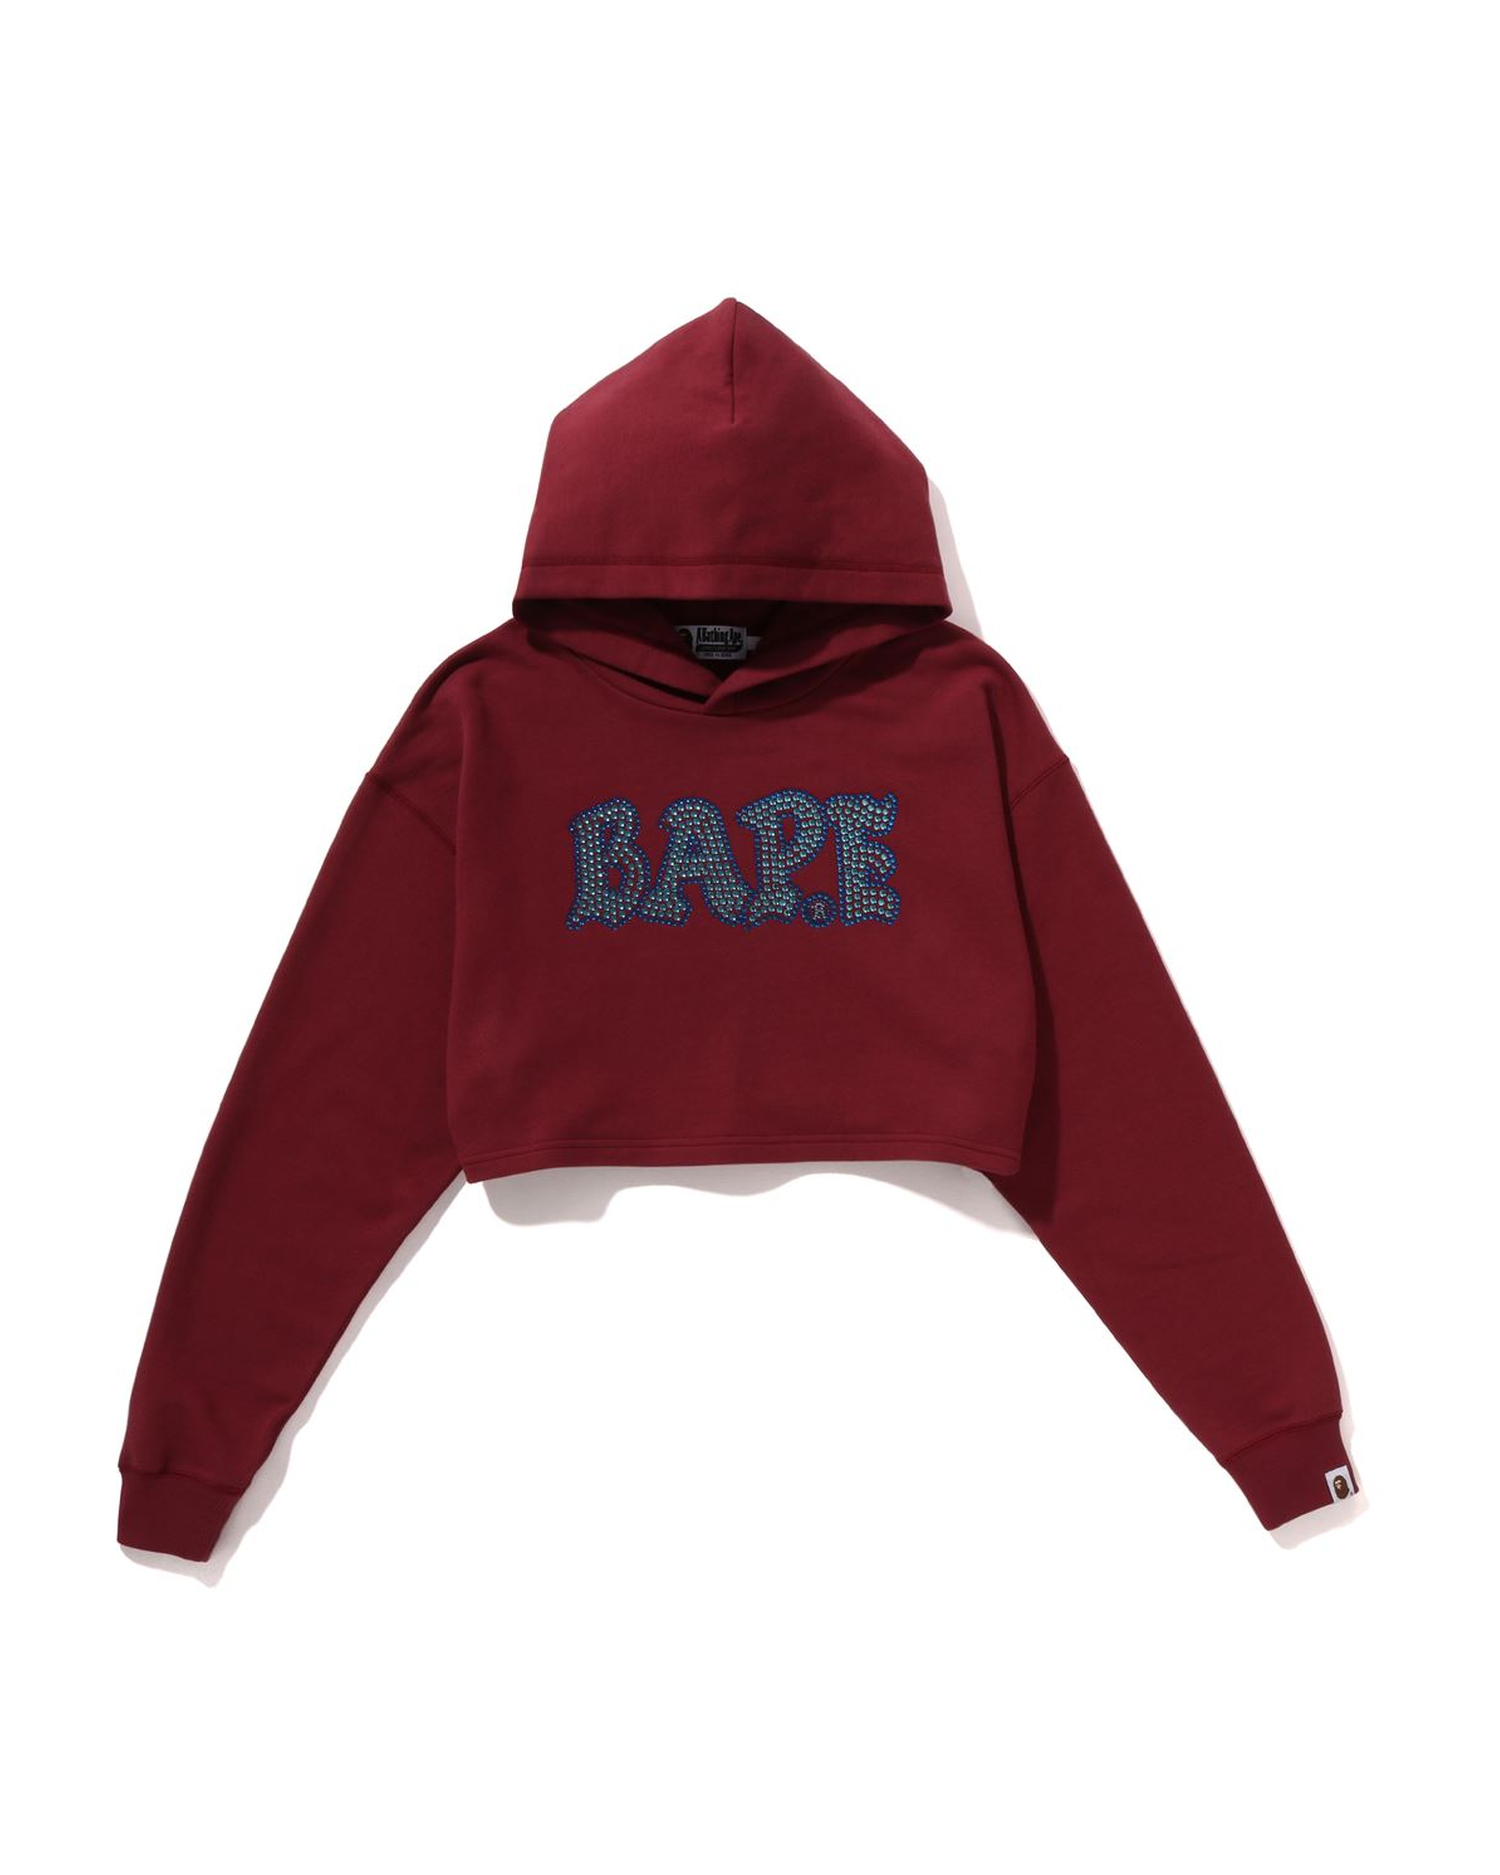 Shop Crystal Stone BAPE Cropped Pullover Hoodie Online | BAPE